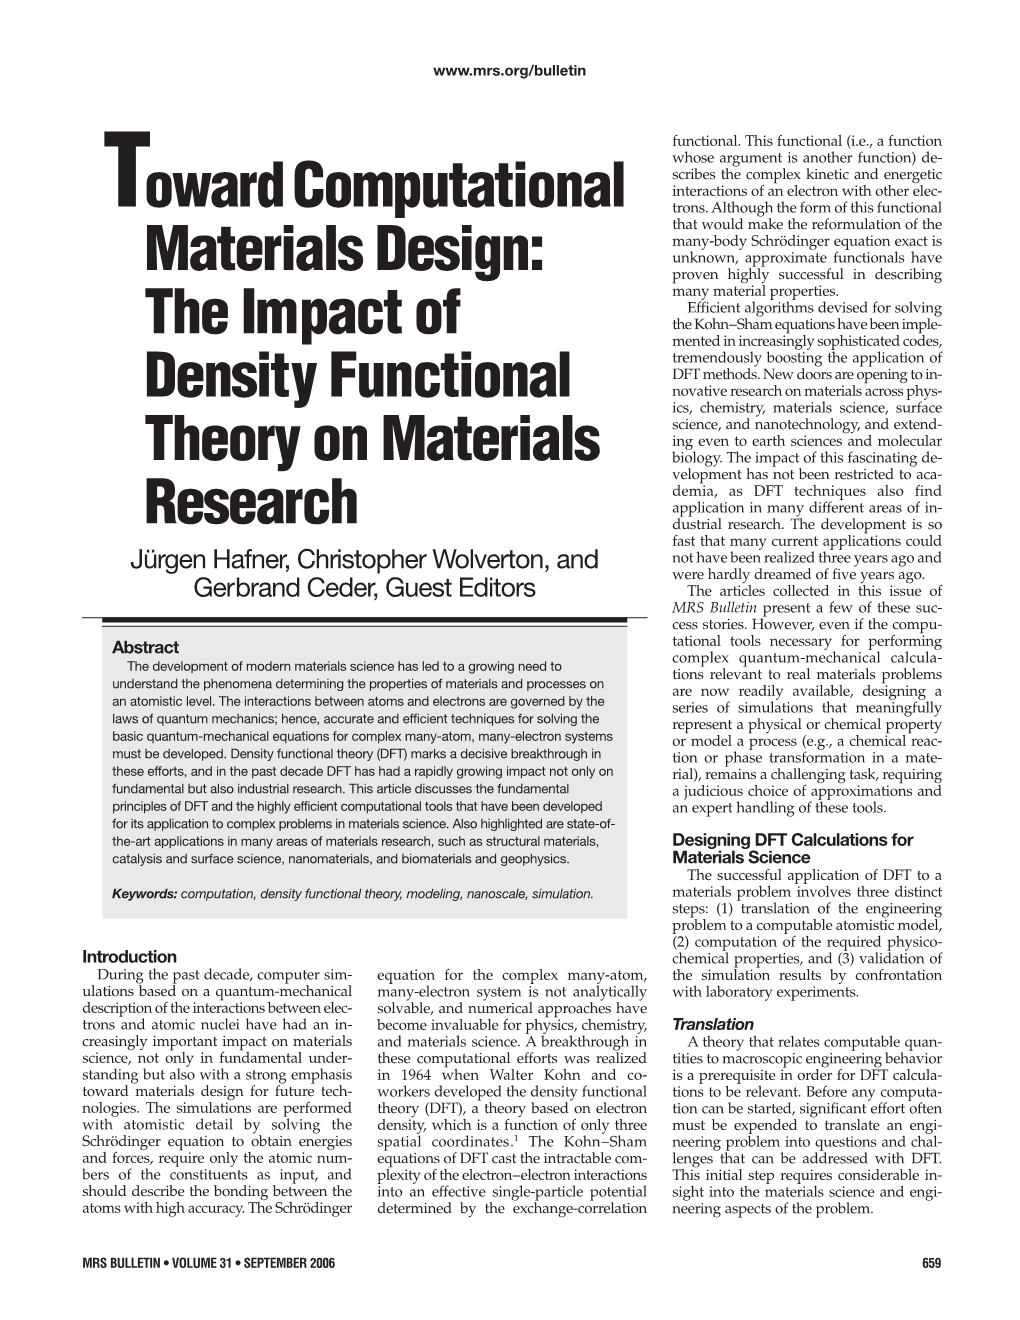 The Impact of Density Functional Theory on Materials Research